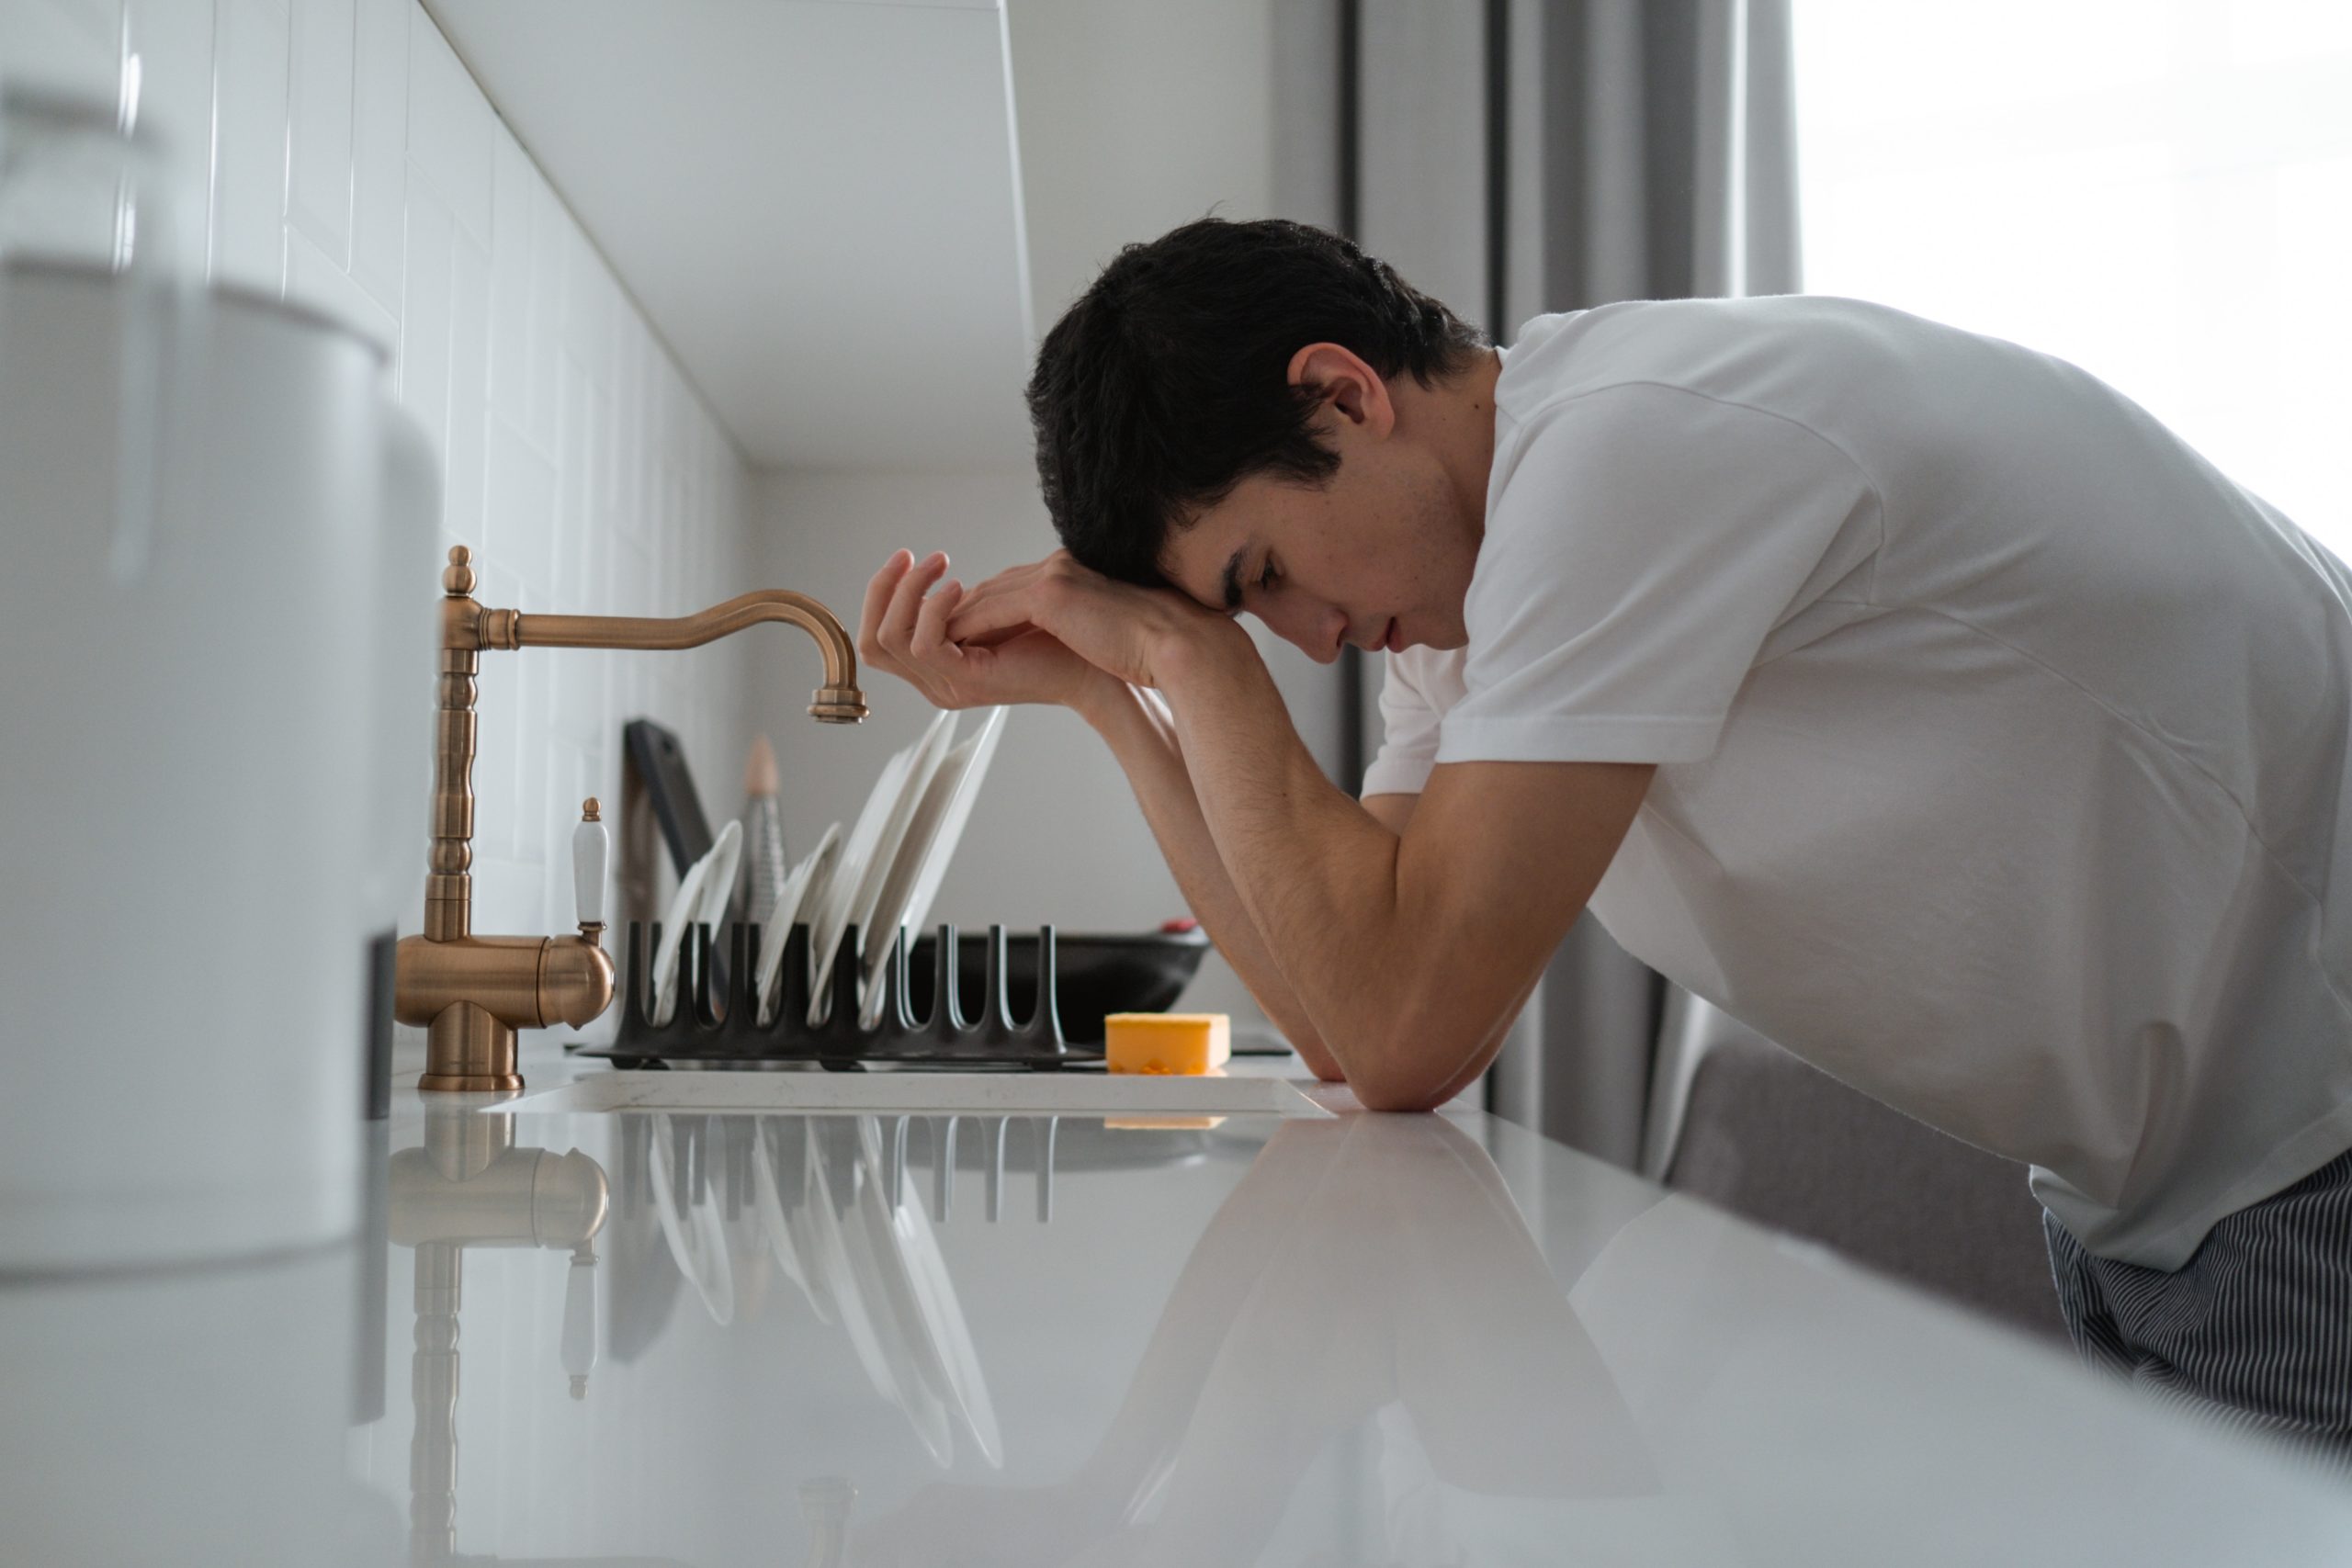 Teen feeling sad, leaning over a kitchen counter with his head in his hands